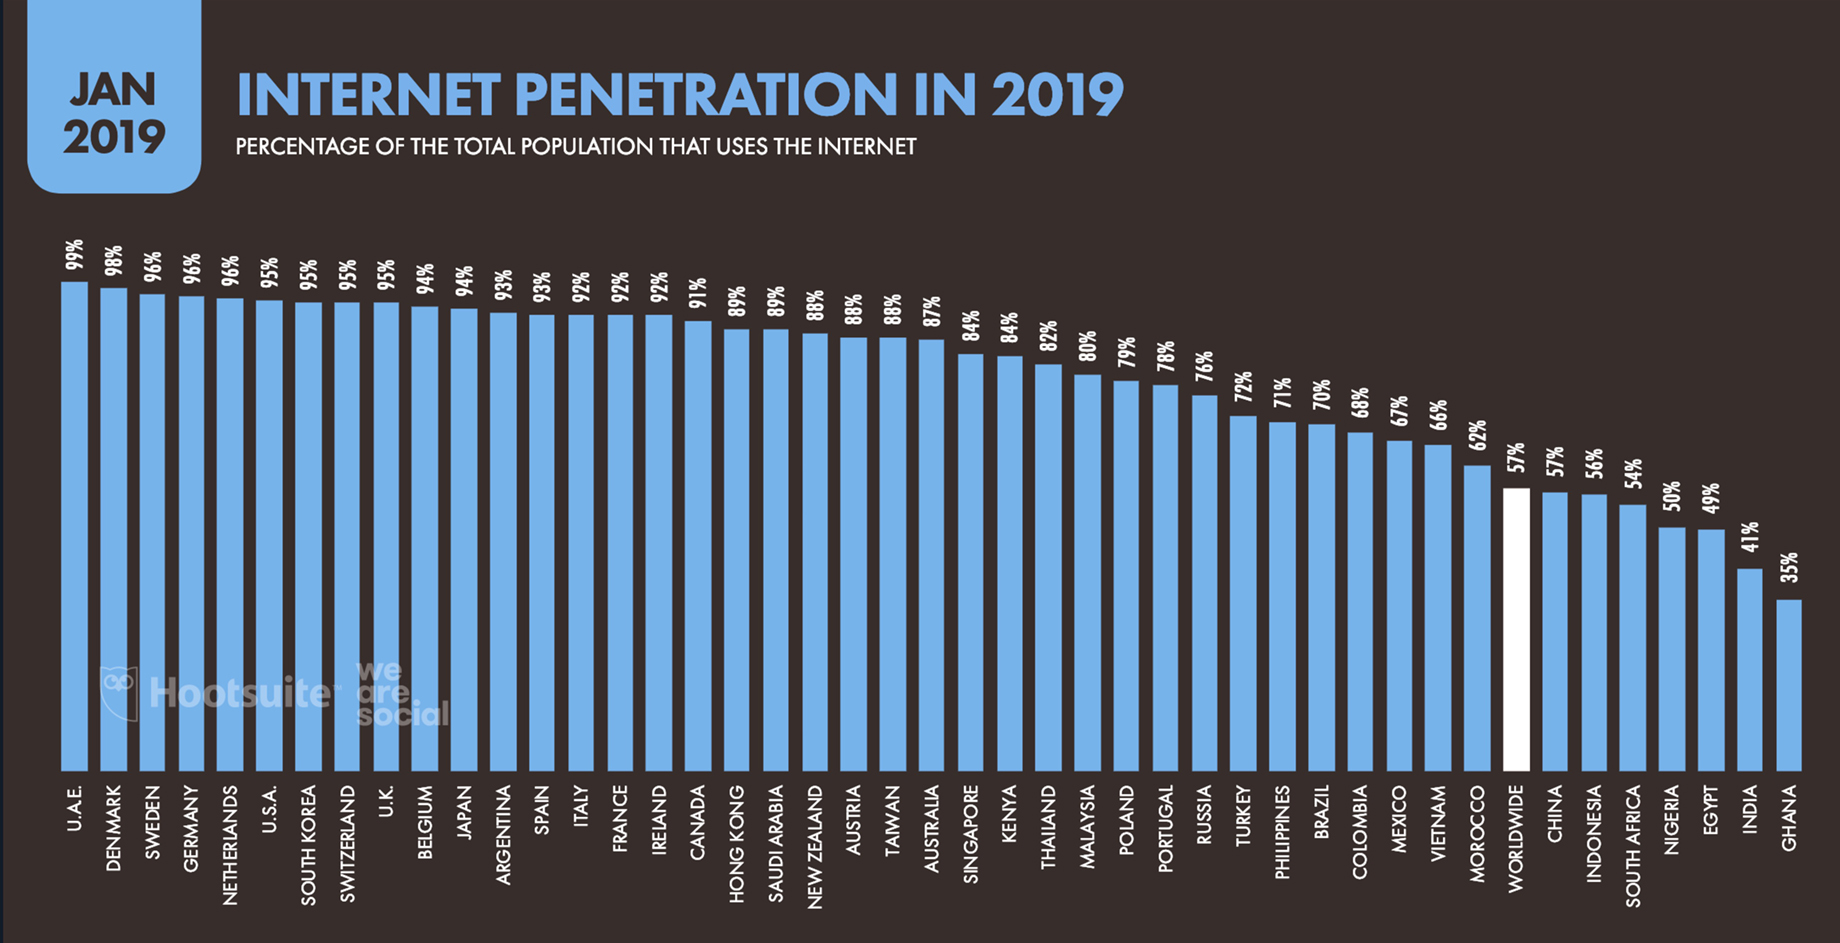 Internet Penetration Worldwide in 2019 - Percentage of the Total Population that uses the Internet